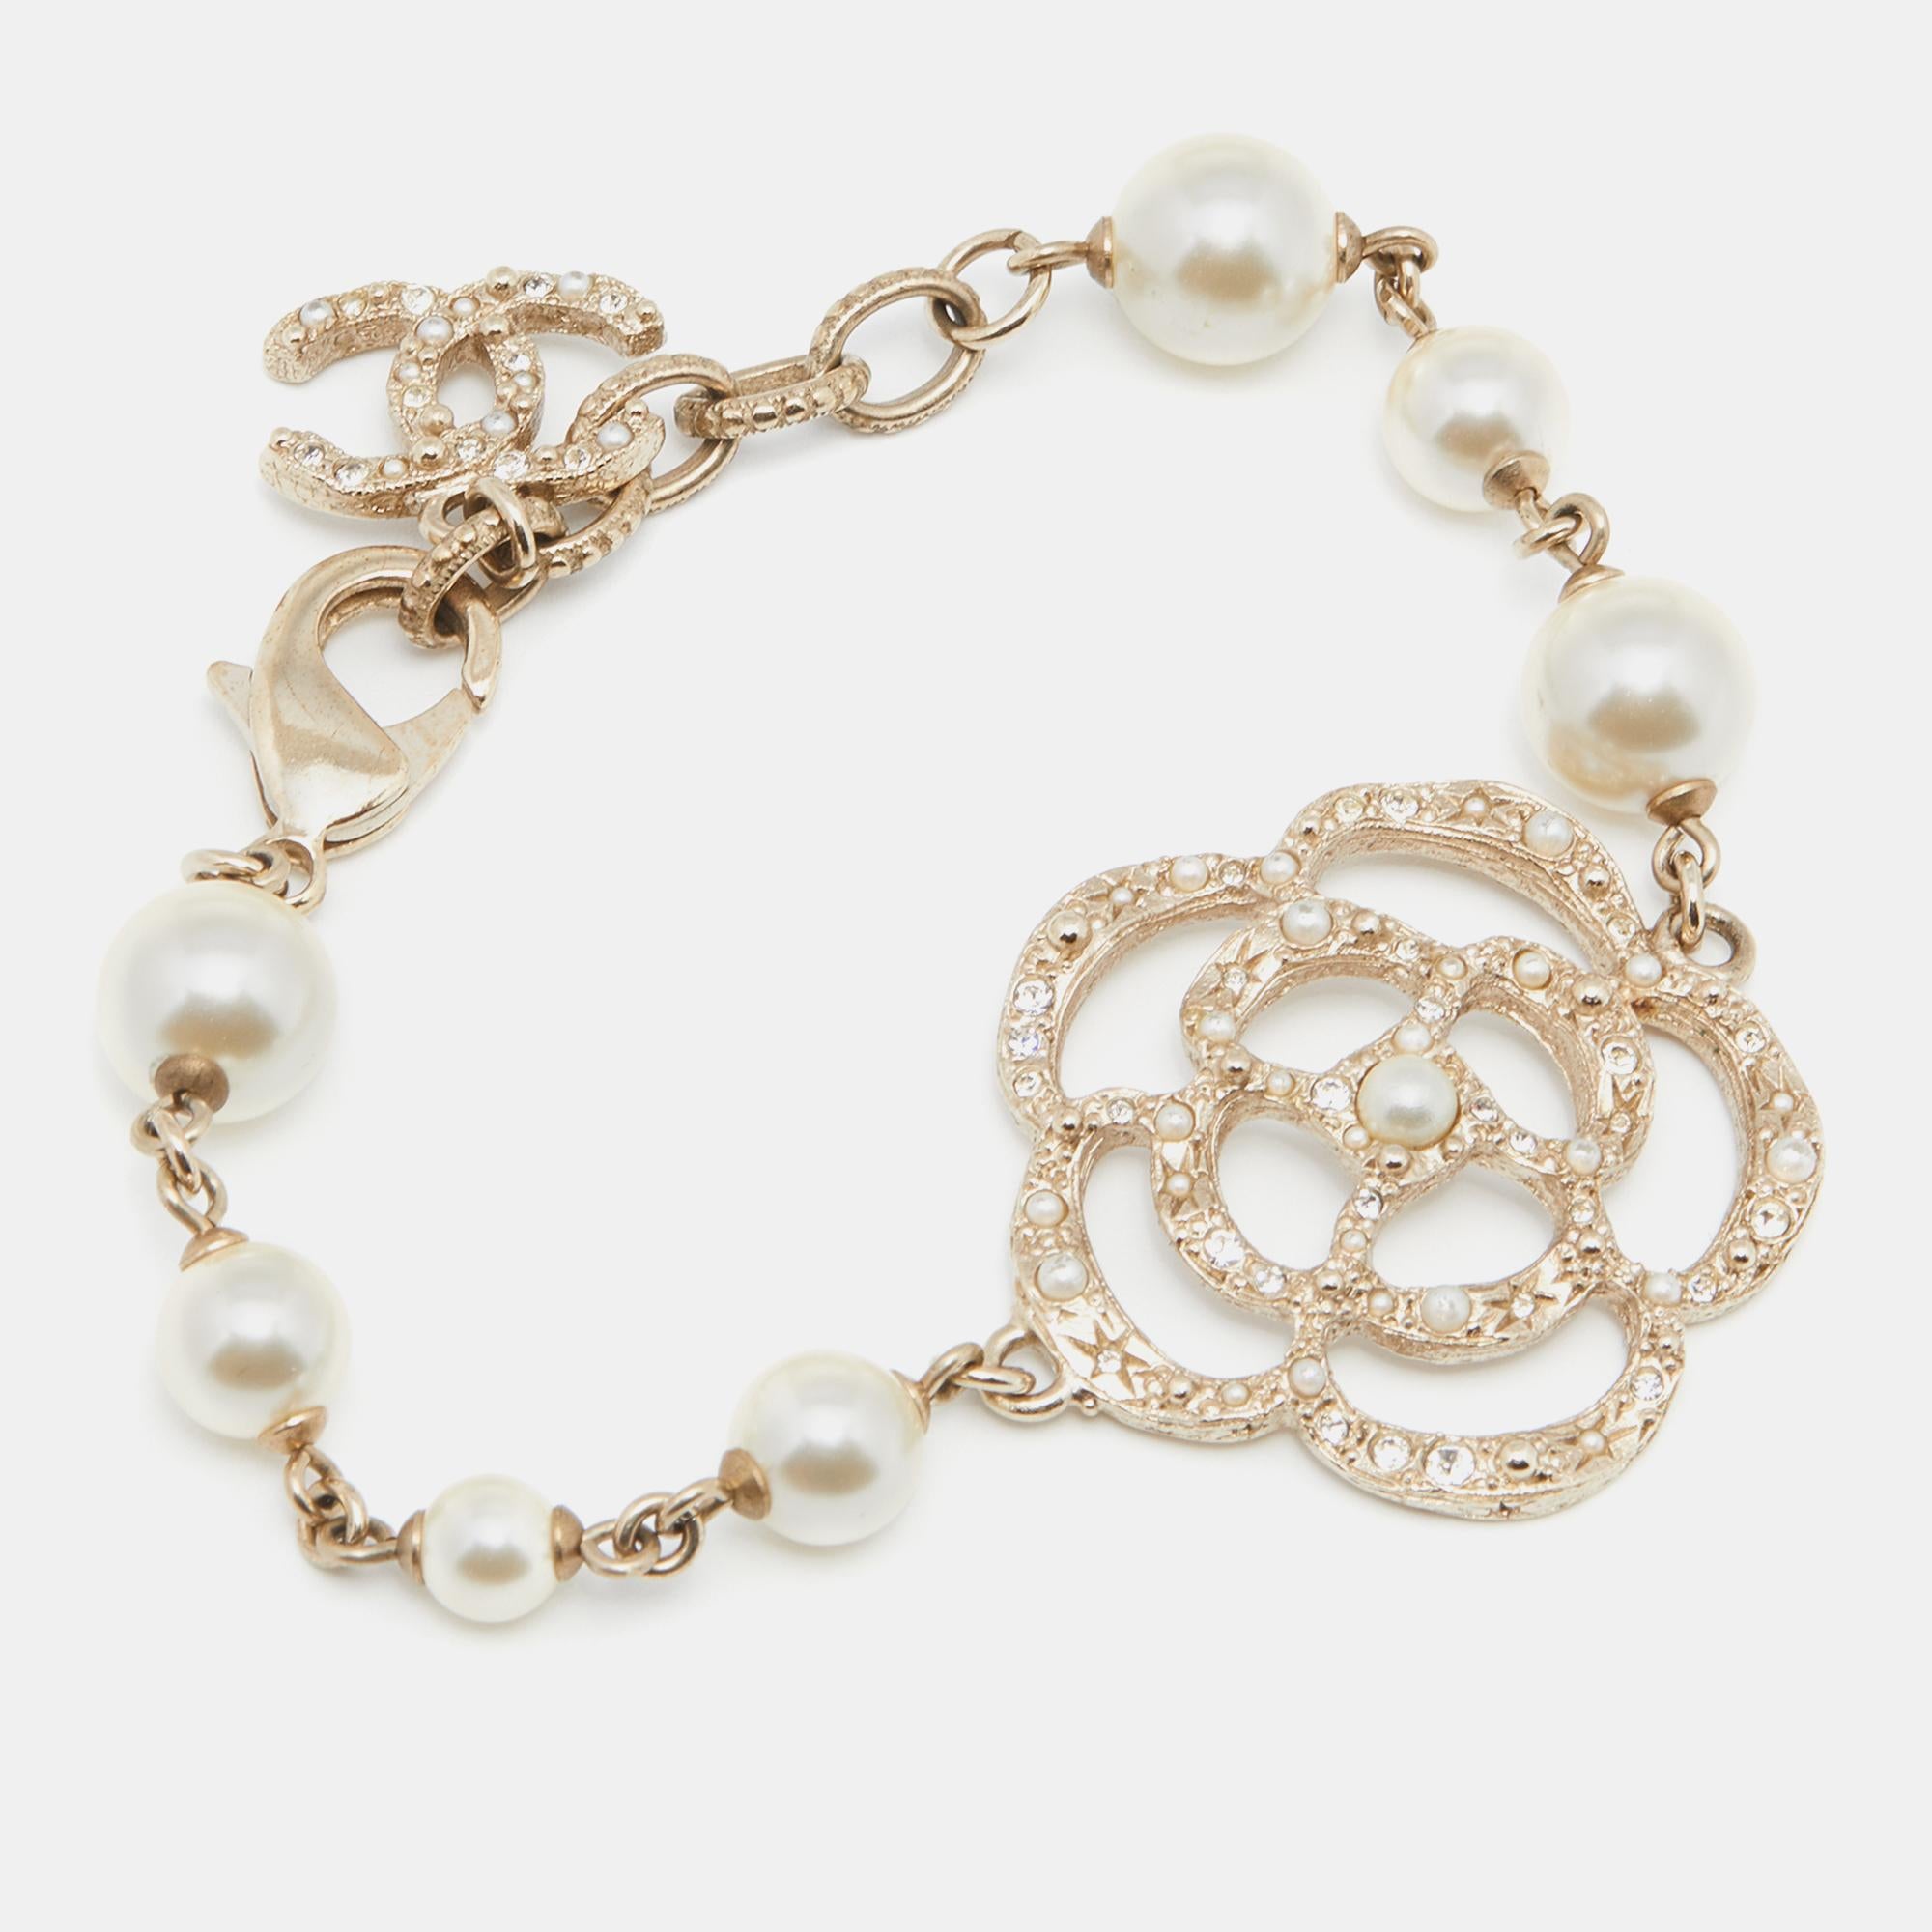 Be it to your dinner outfit or summer dress, this Chanel bracelet will surely add an elegant touch. It is crafted from gold-tone metal and added with a CC logo, a Camellia charm, and beads.

